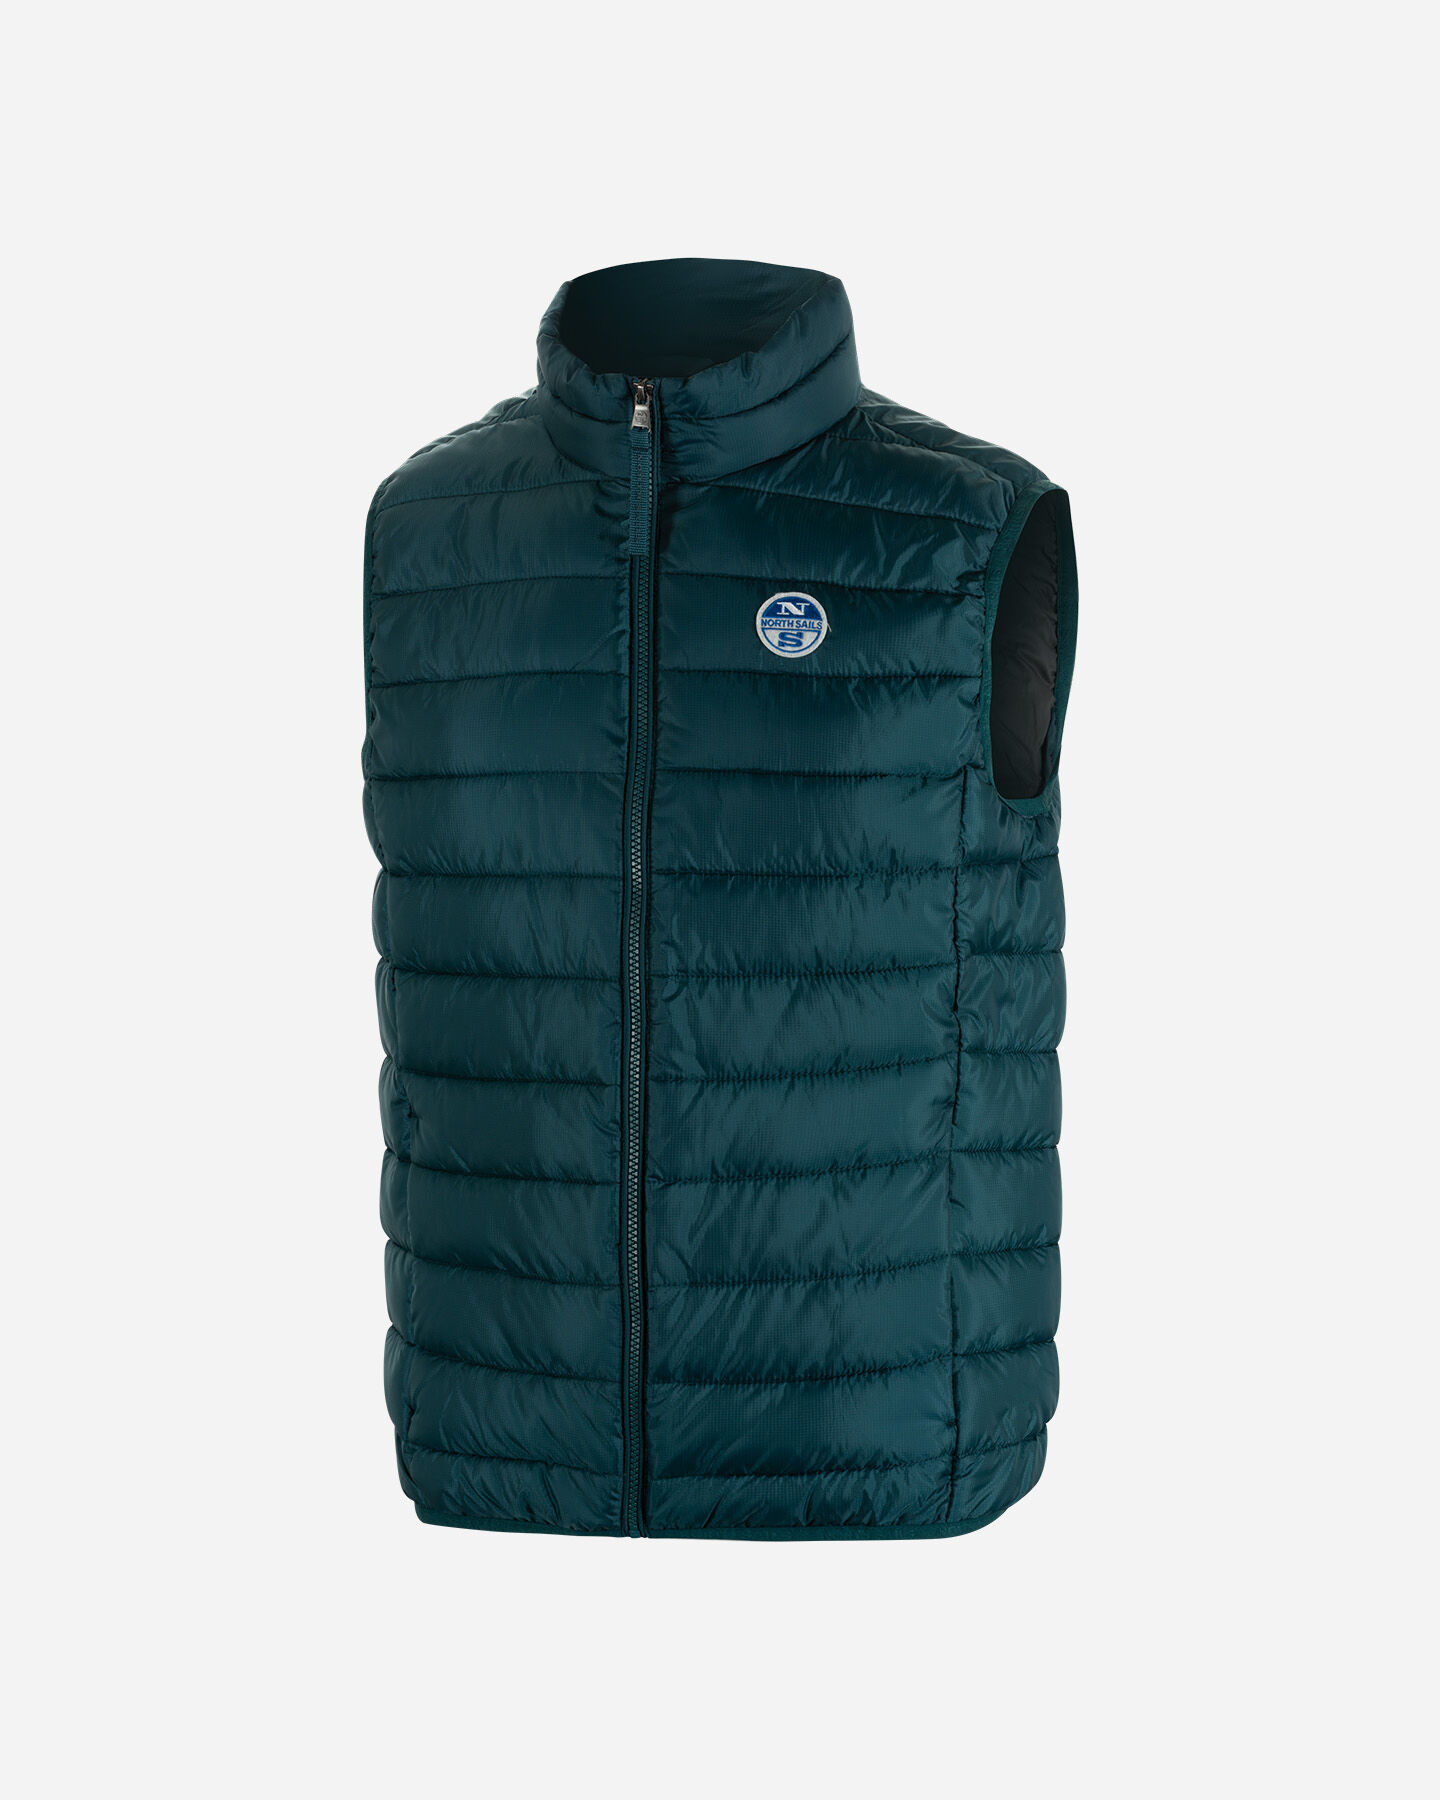  Gilet NORTH SAILS RECYCLED SKYE RIPSTOP M S4113440|0749|M scatto 0